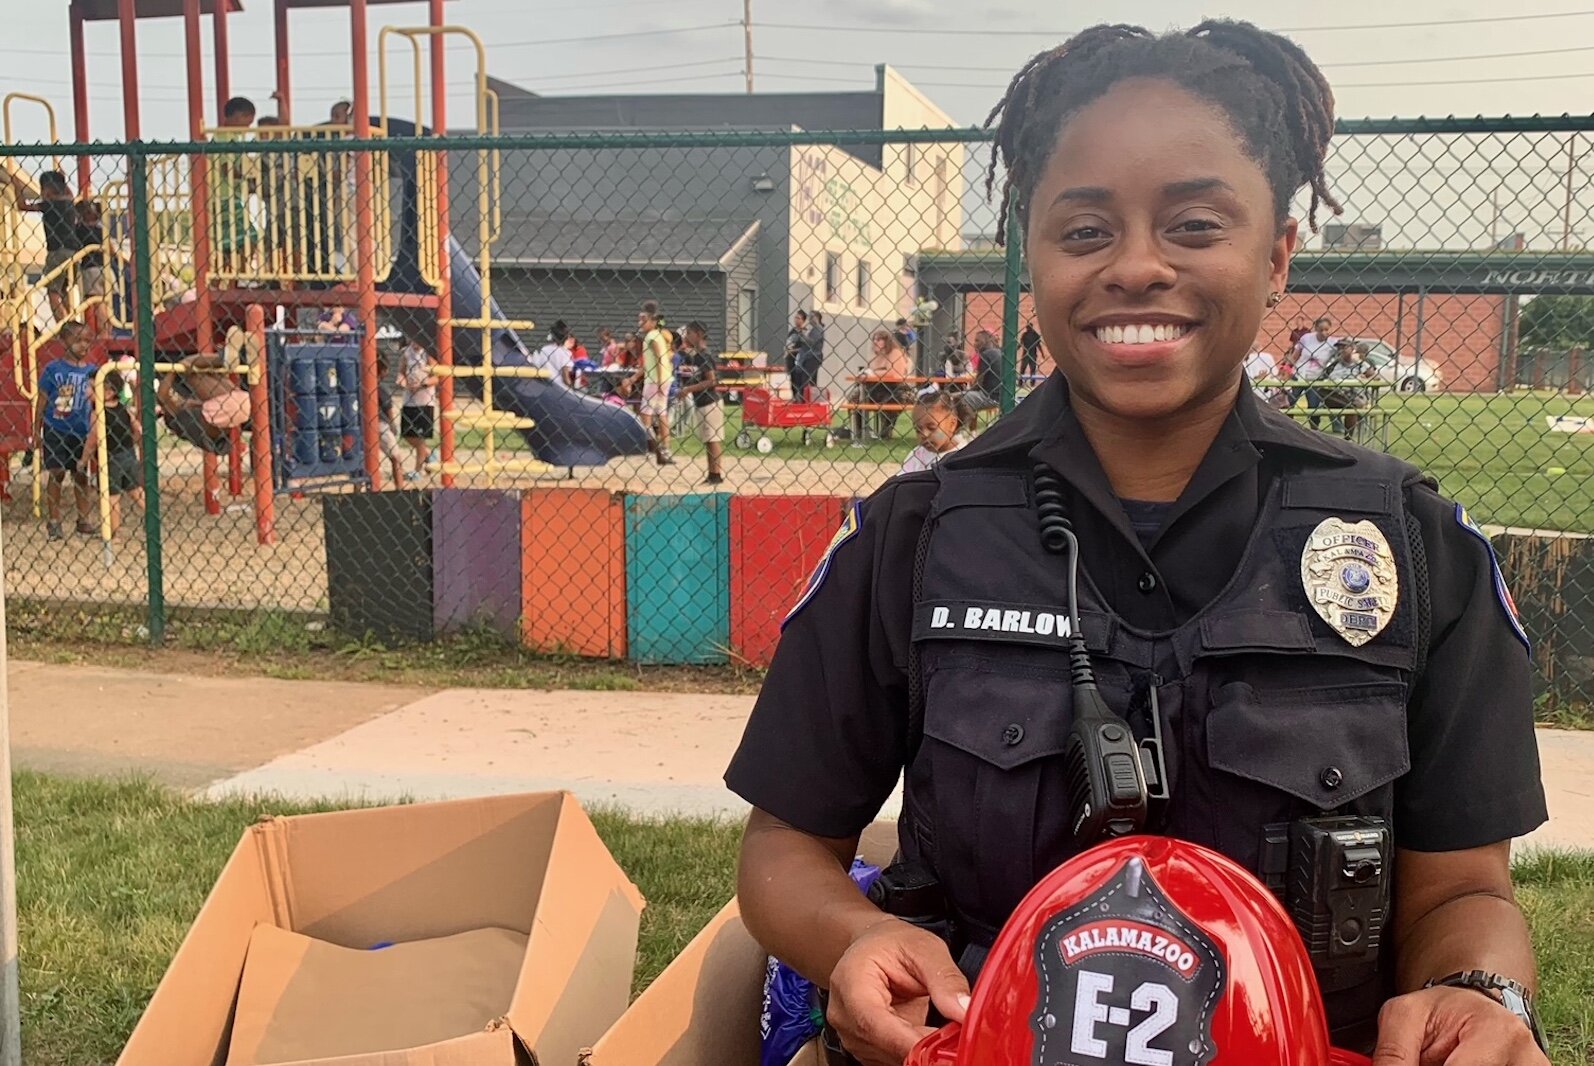 Community Service Officer Dajanick Barlow was among Kalamazoo Public Safety officers talkin with families on Tuesday afternoon during National Night Out in the Northside Neighborhood.